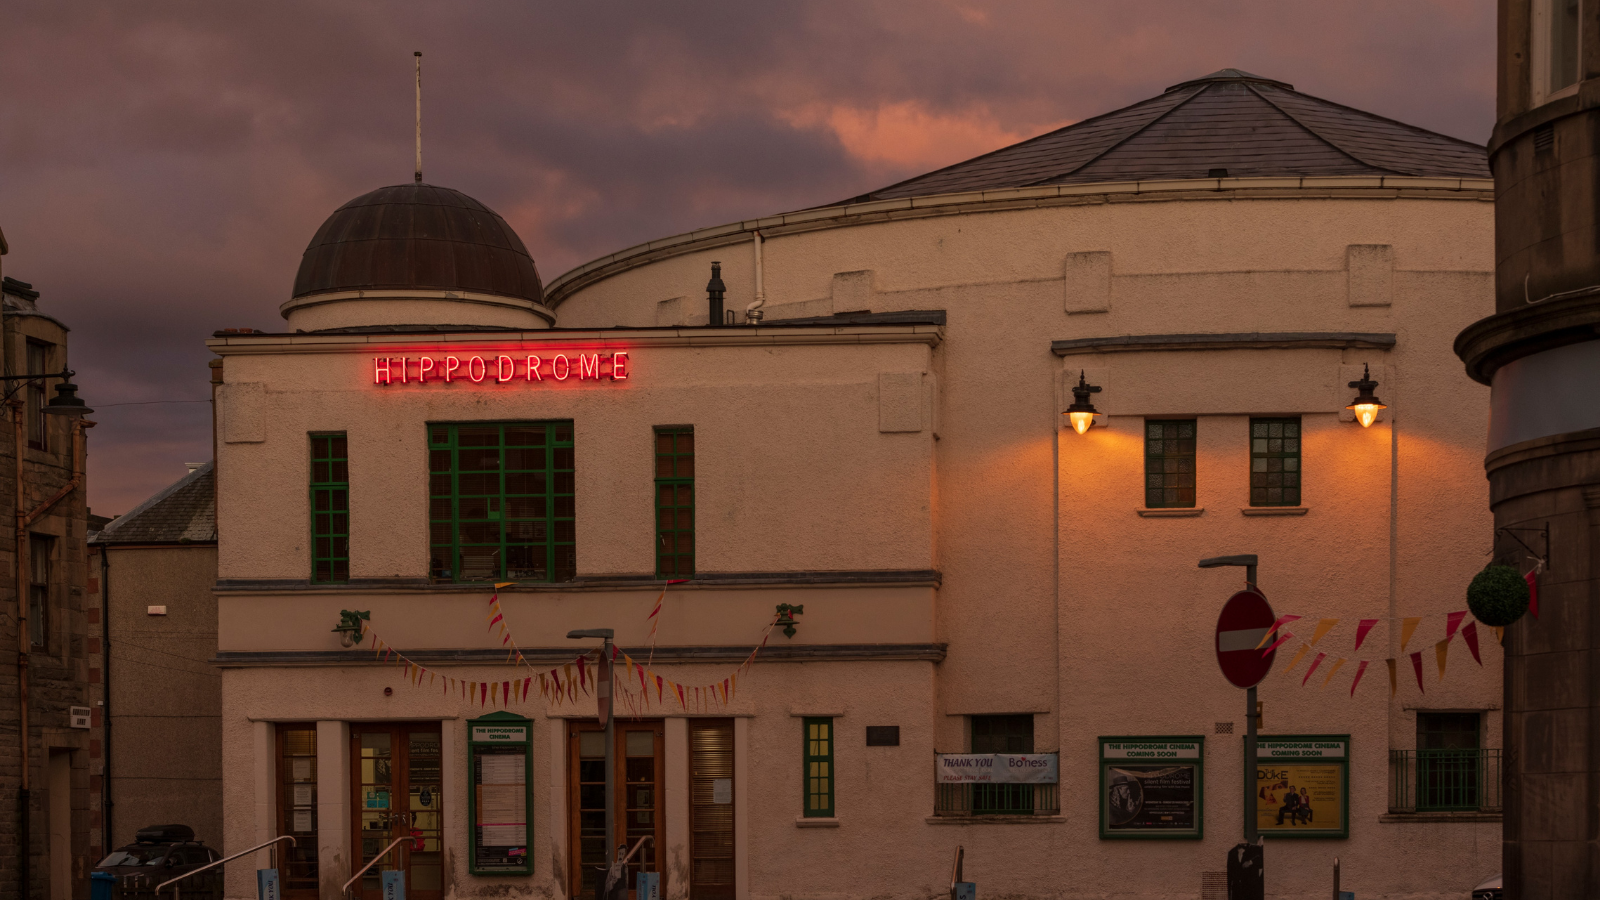 A large 1920s style building at dusk. The word HIPPODROME is lit up in bright red lights.